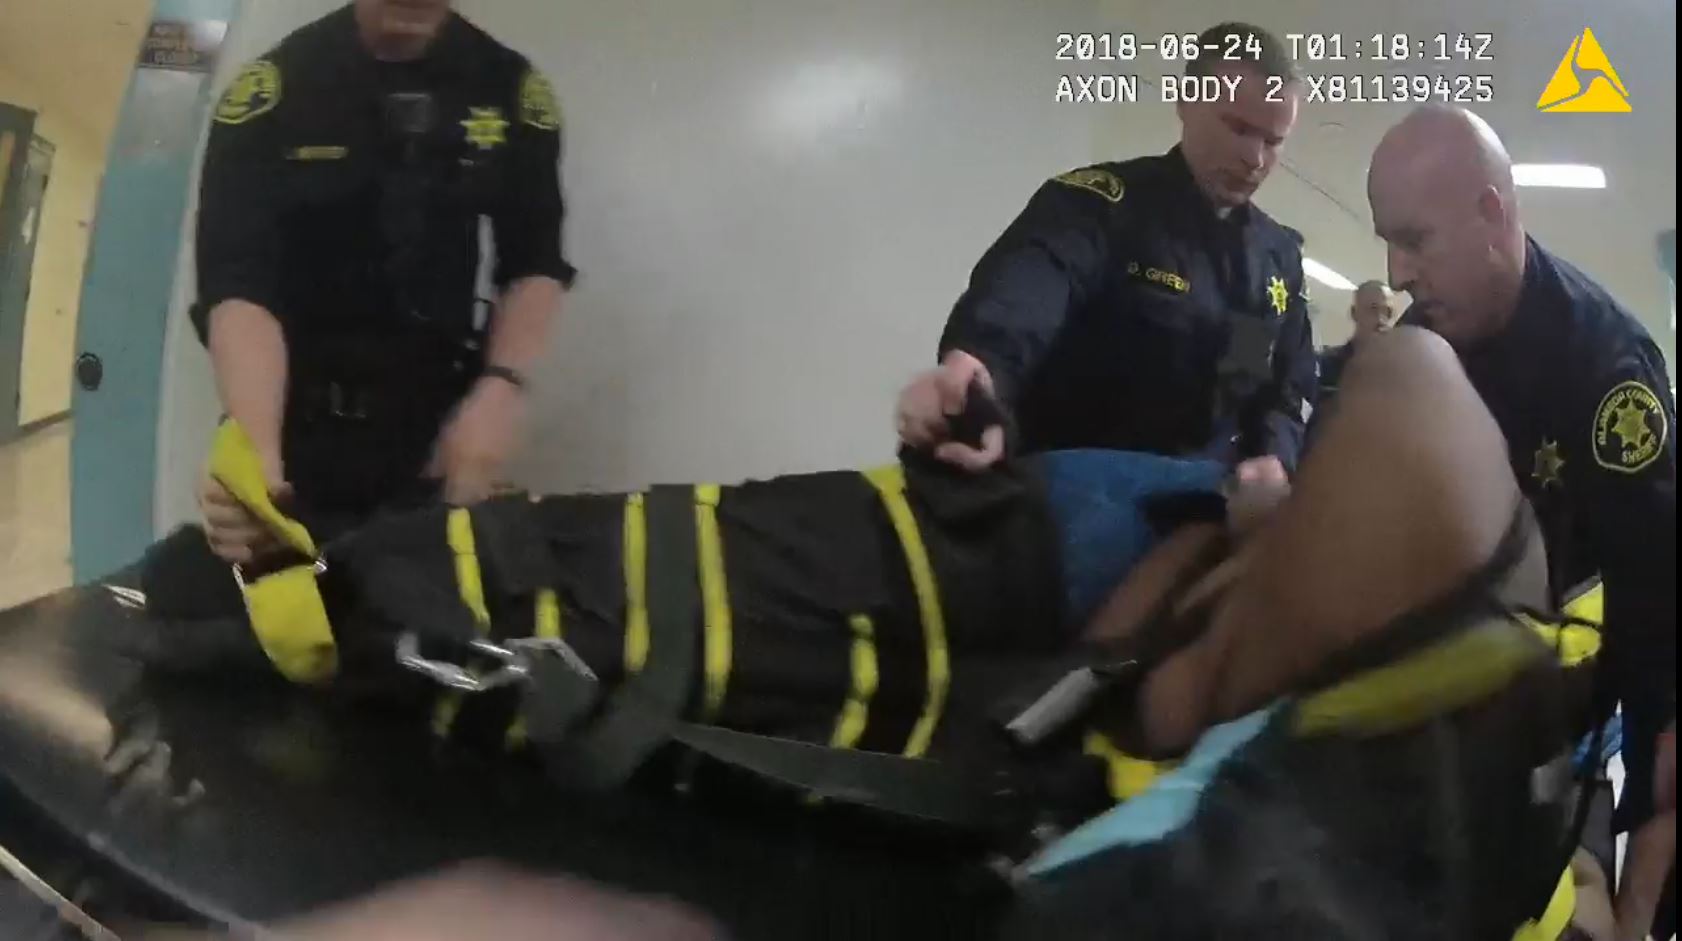 Deputies use a WRAP restraint on Dujuan Armstrong that caused his death in Santa Rita Jail. Alameda County Sheriff's Office video still.